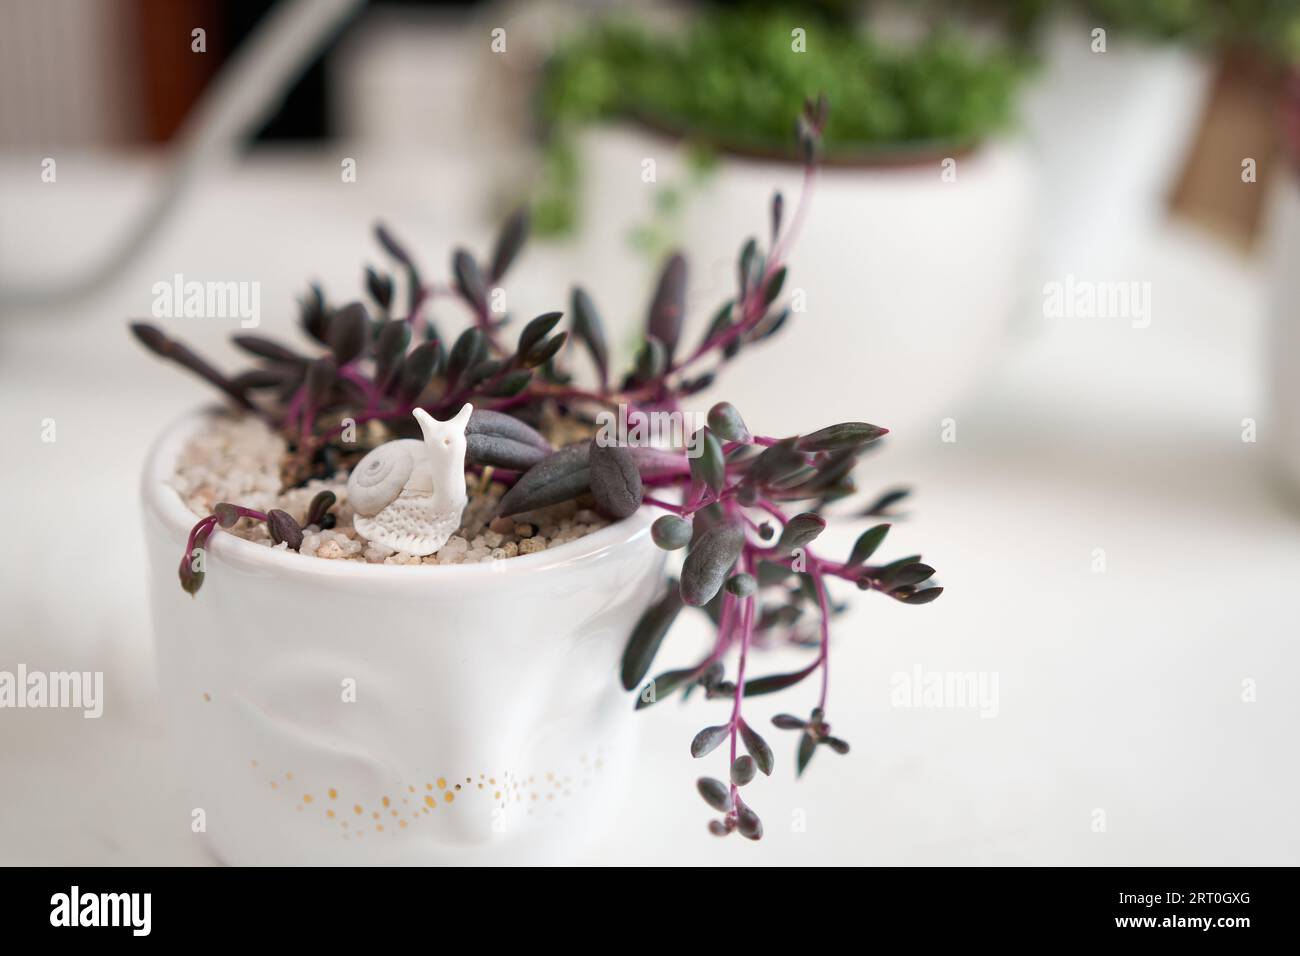 Potted othonna capensis house plant in white ceramic pot and other succulent plants on a table indoors Stock Photo